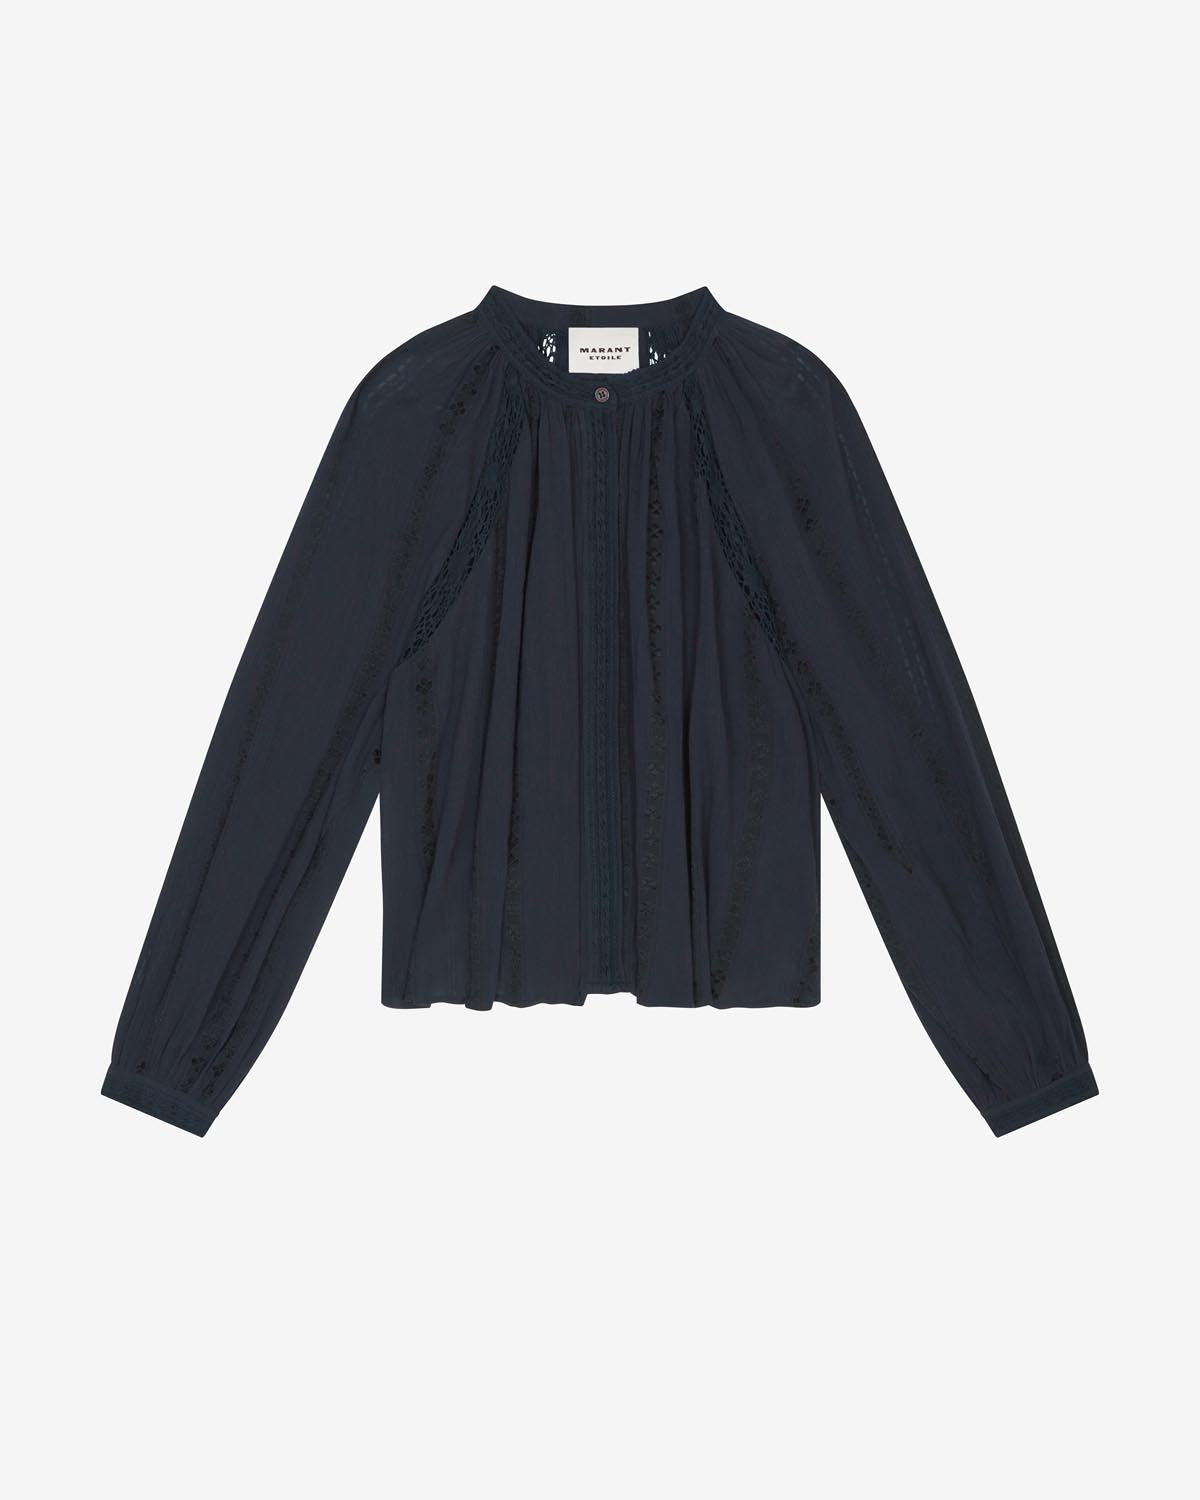 Tops and Shirts Etoile Woman | ISABEL MARANT Official